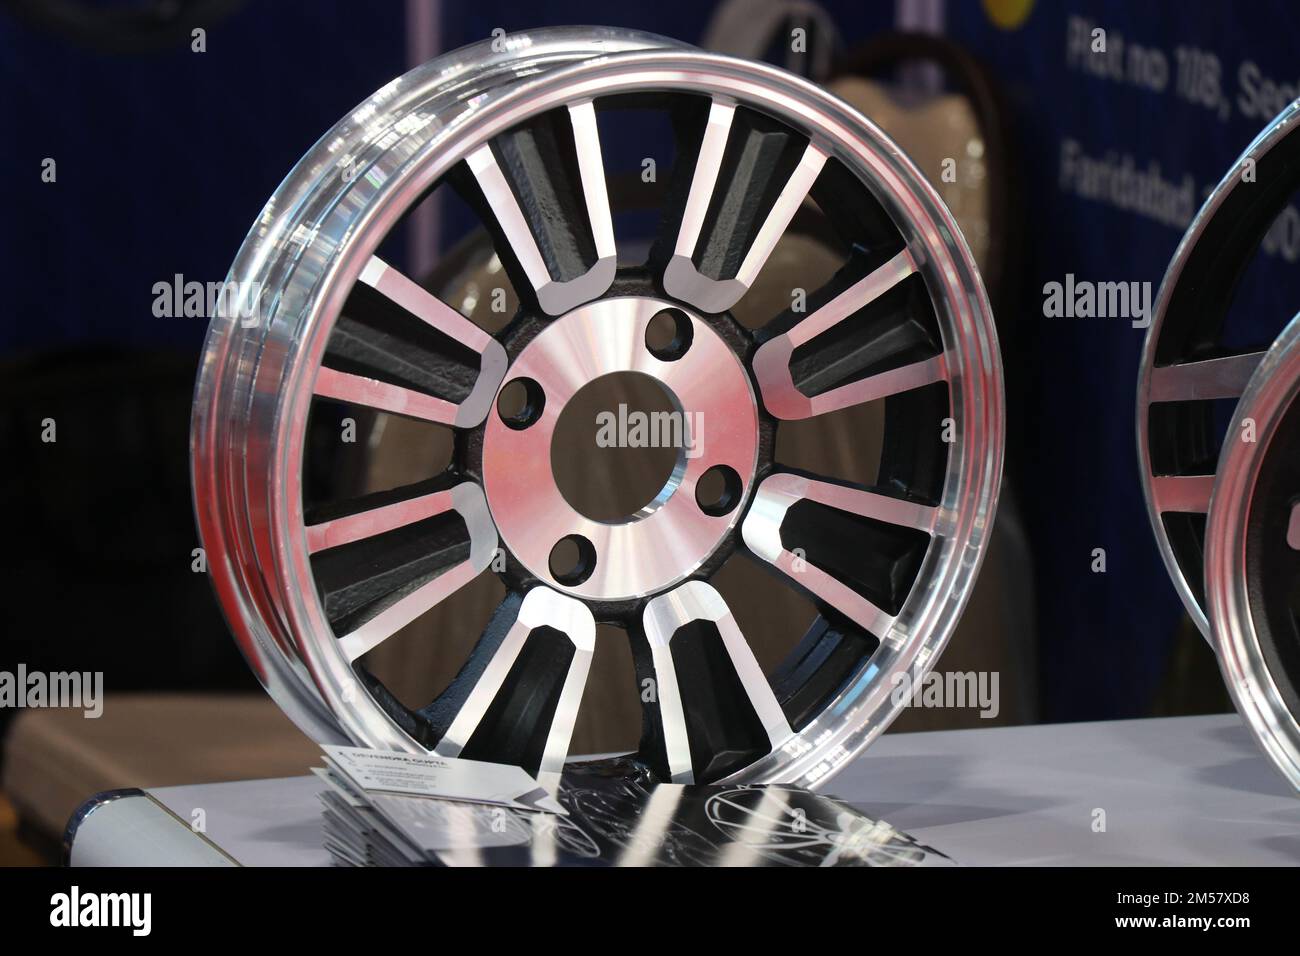 Mag wheel or rims used for alloy wheels in automobiles with a modern design and made up of alloy metals Stock Photo